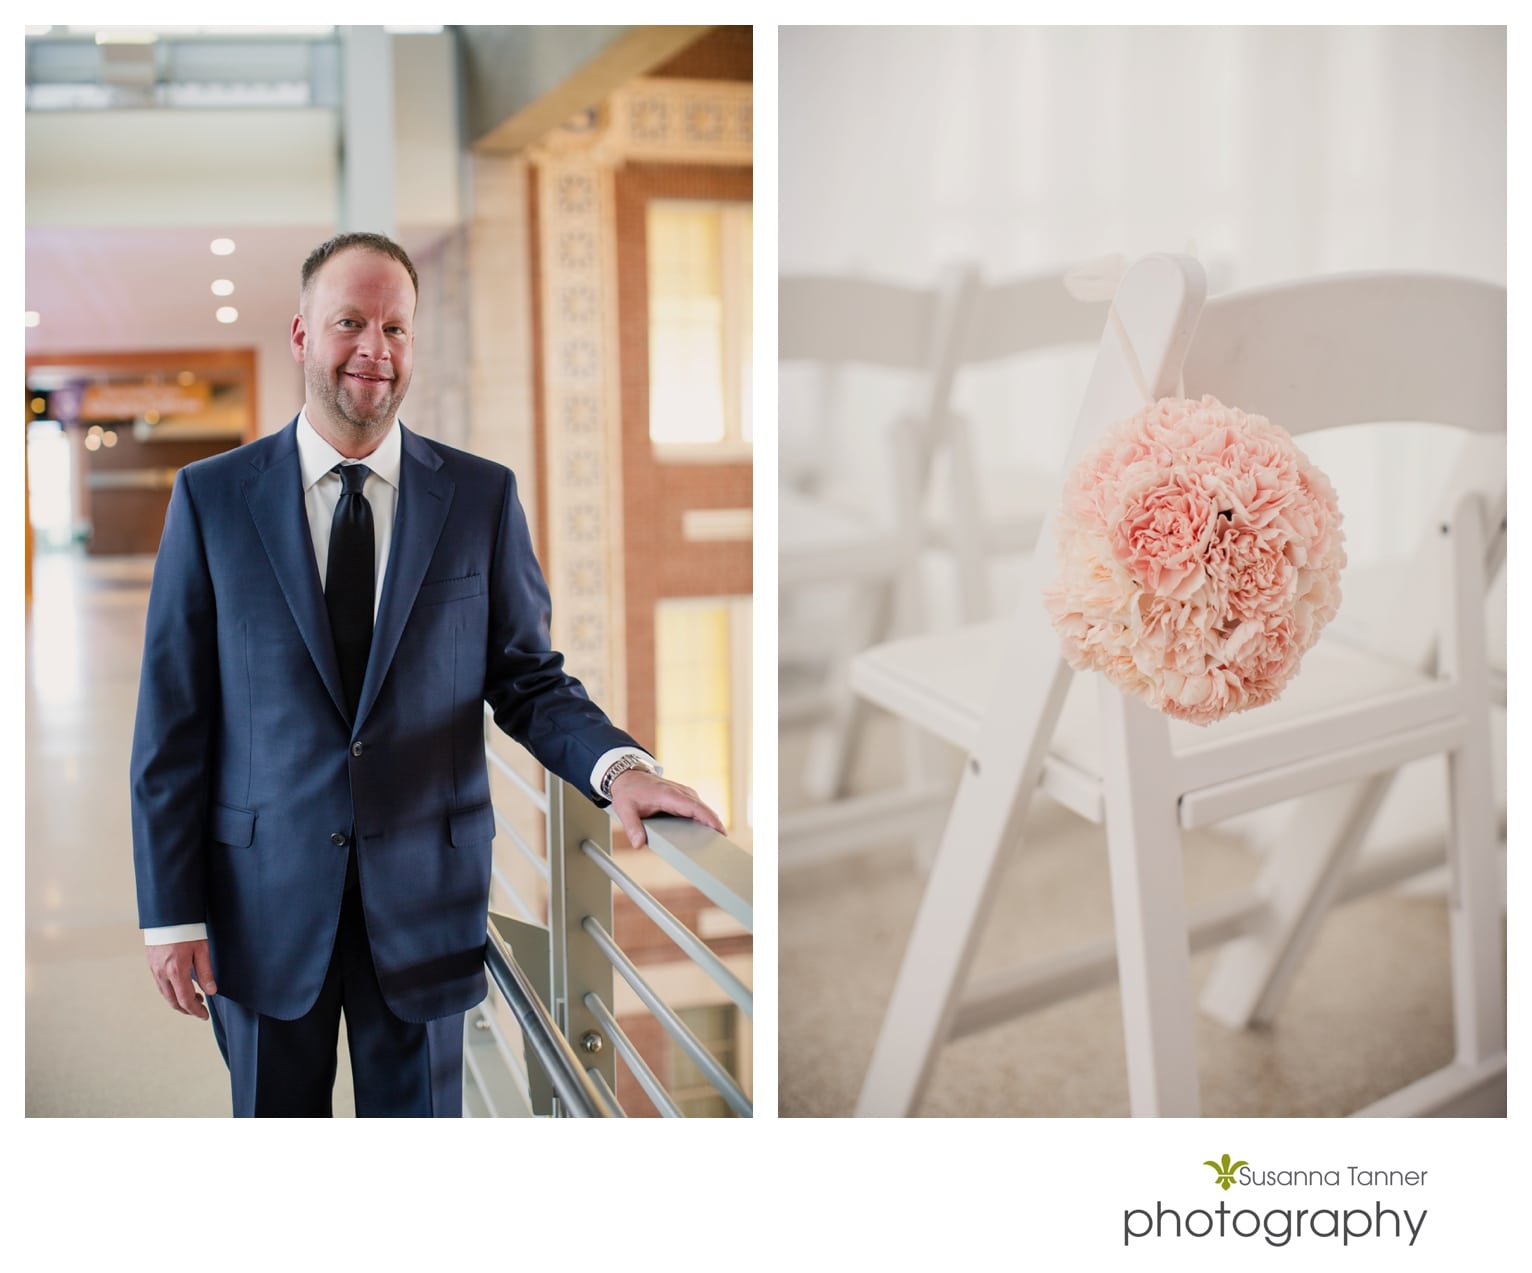 Indiana State Museum wedding photography, groom portrait and close up of flower ball on ceremony chair